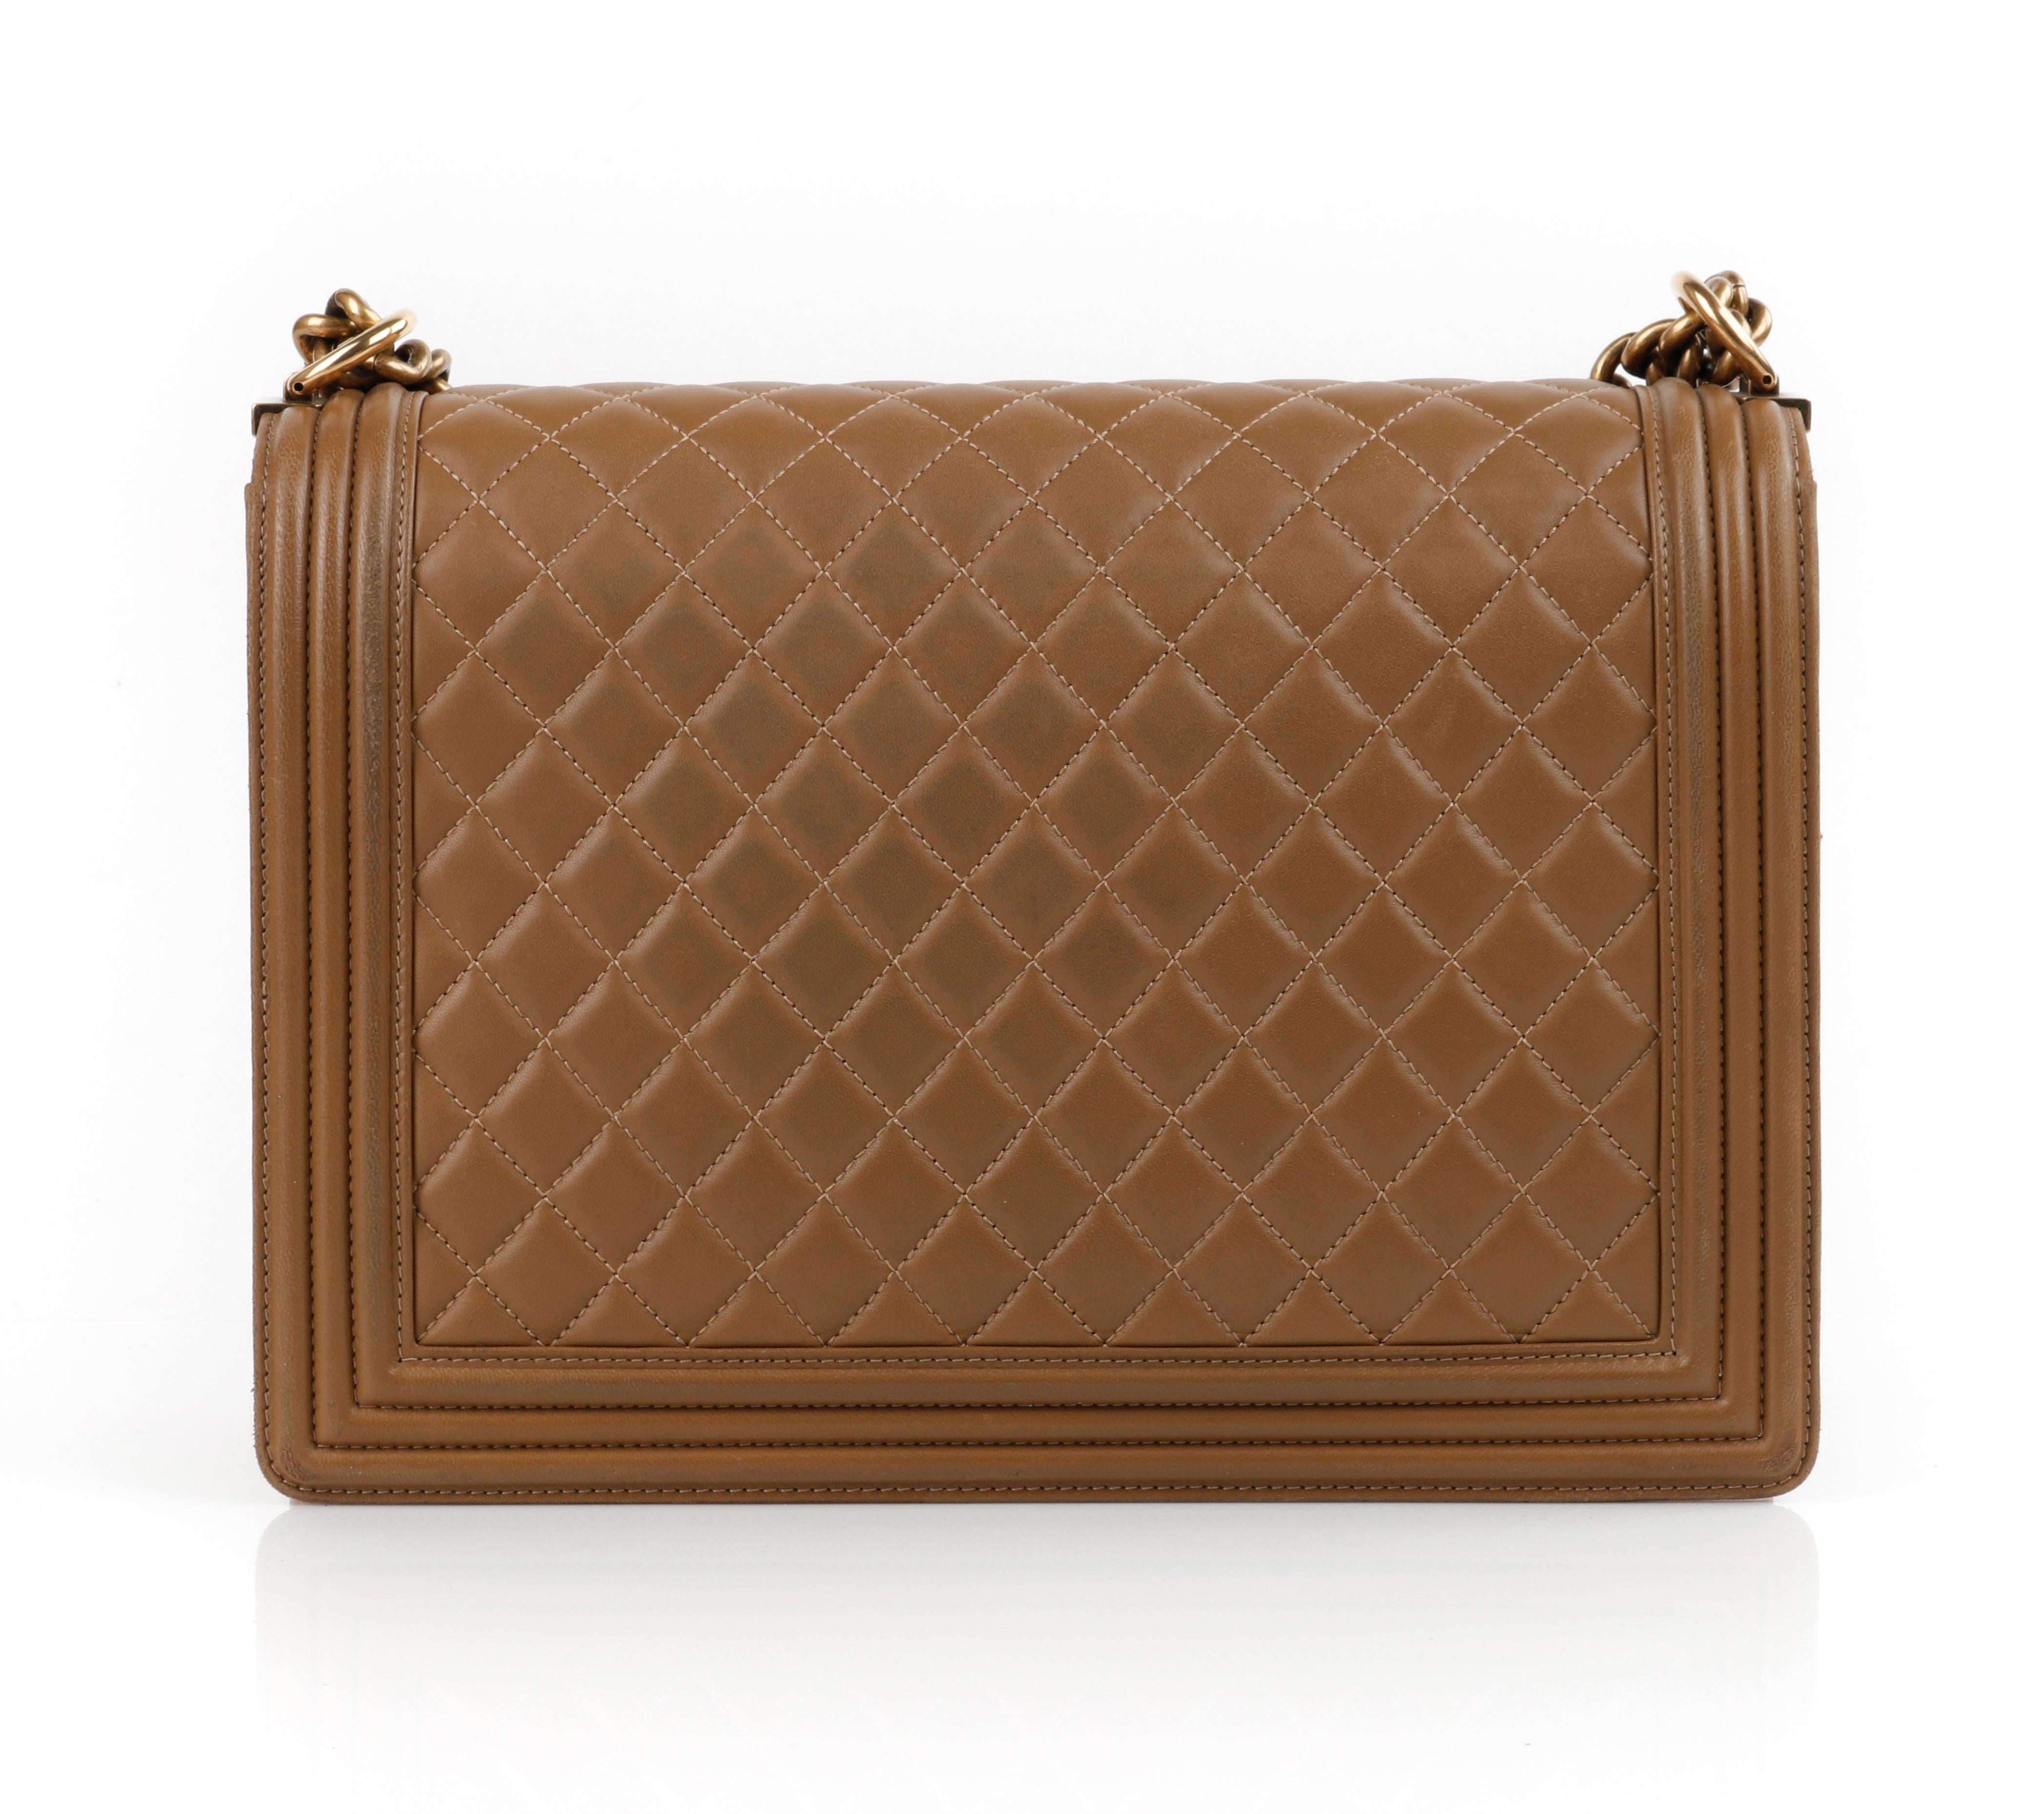 CHANEL c.2014 “Boy” Tan Quilted Leather Gold Hardware Cross-body Shoulder Bag In Good Condition In Thiensville, WI